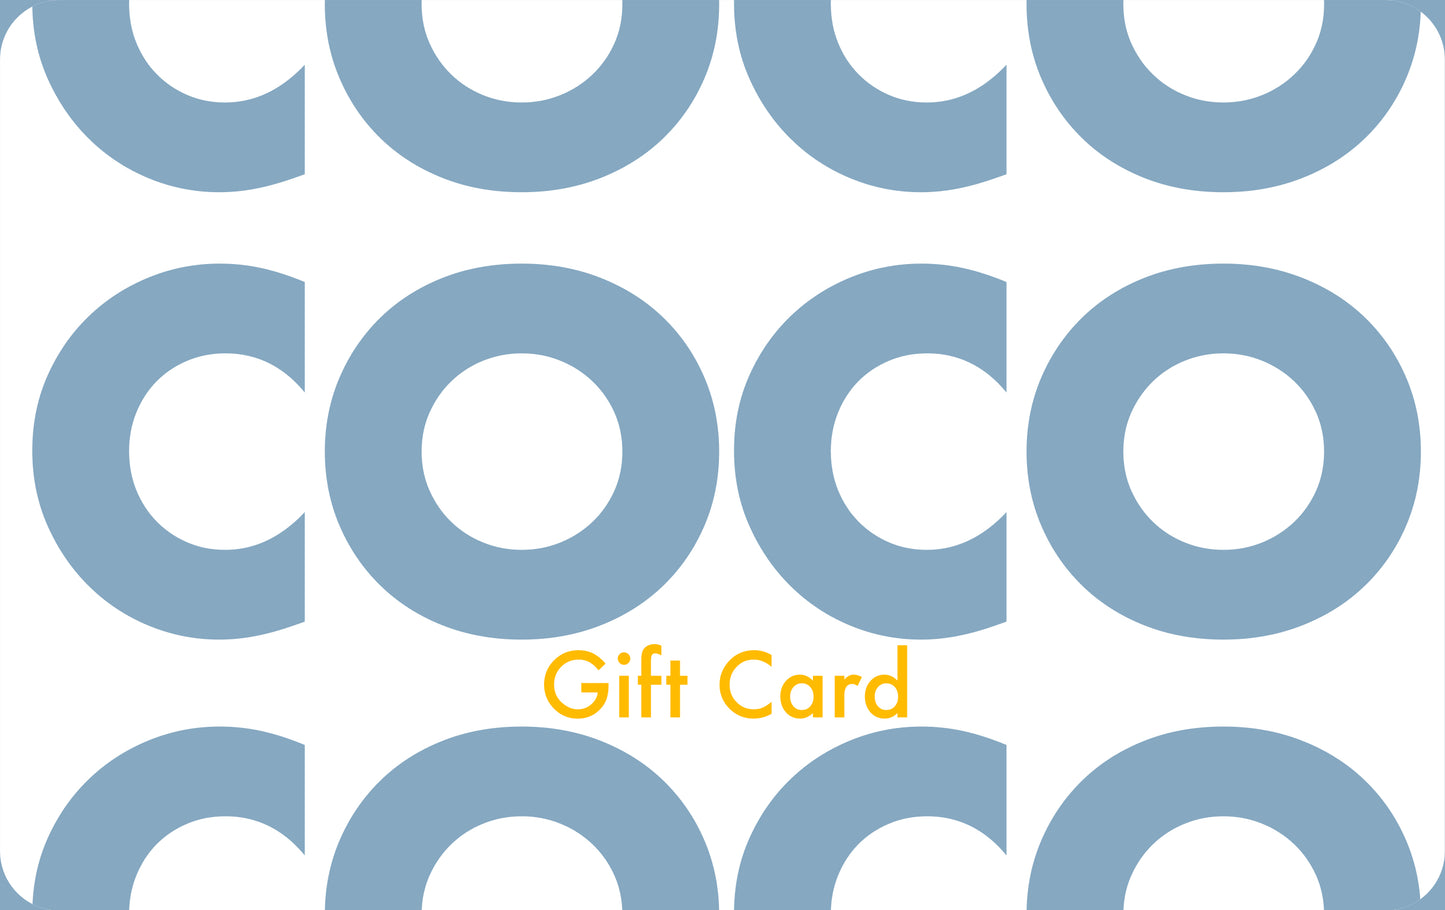 COCo Gift Card